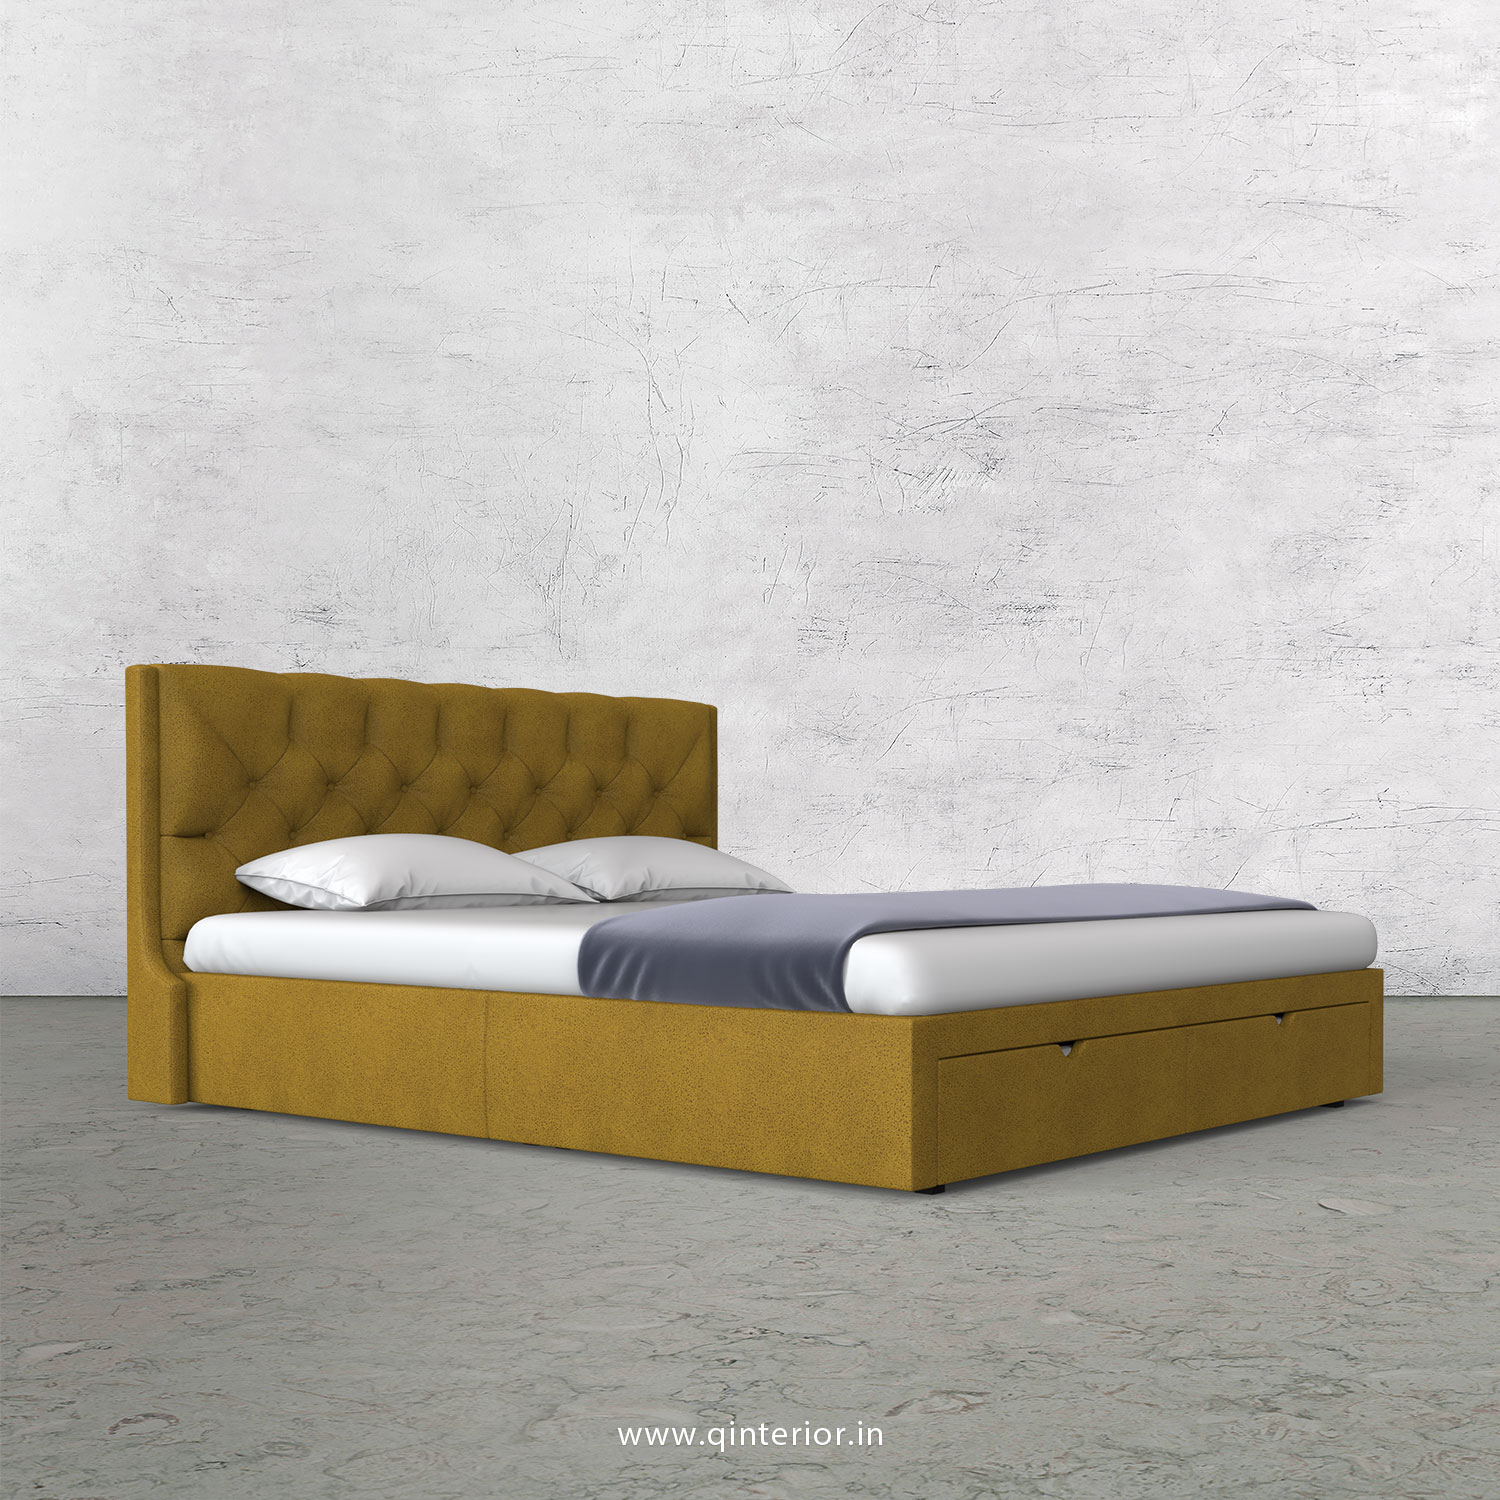 Scorpius King Size Storage Bed in Fab Leather Fabric - KBD001 FL18